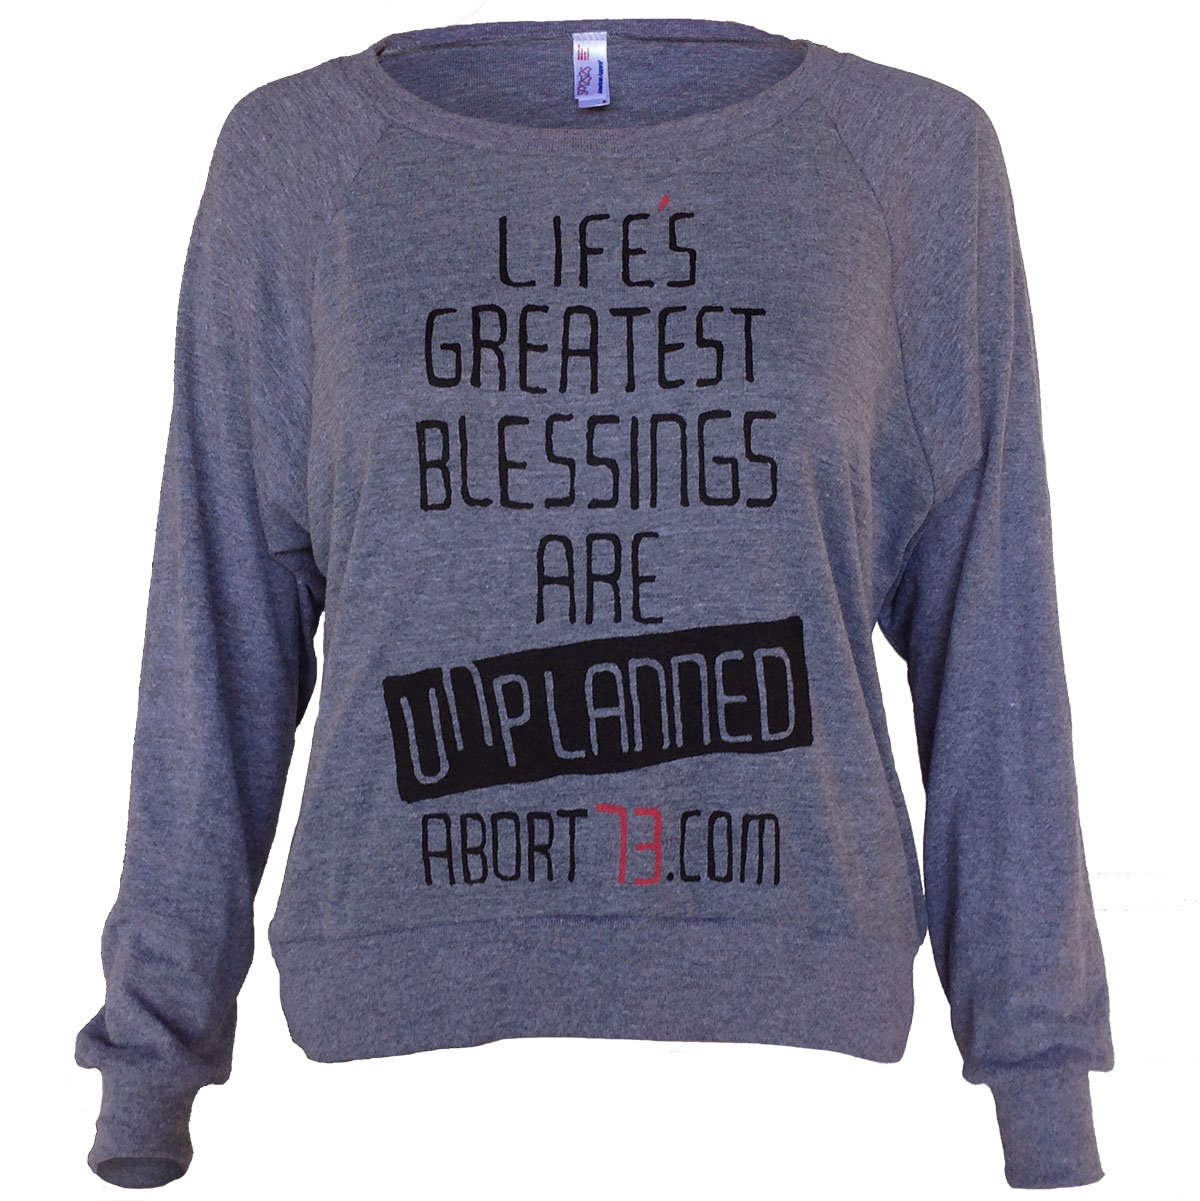 Life’s Greatest Blessings Are Unplanned (Abort73 Girls Lightweight Pullover)